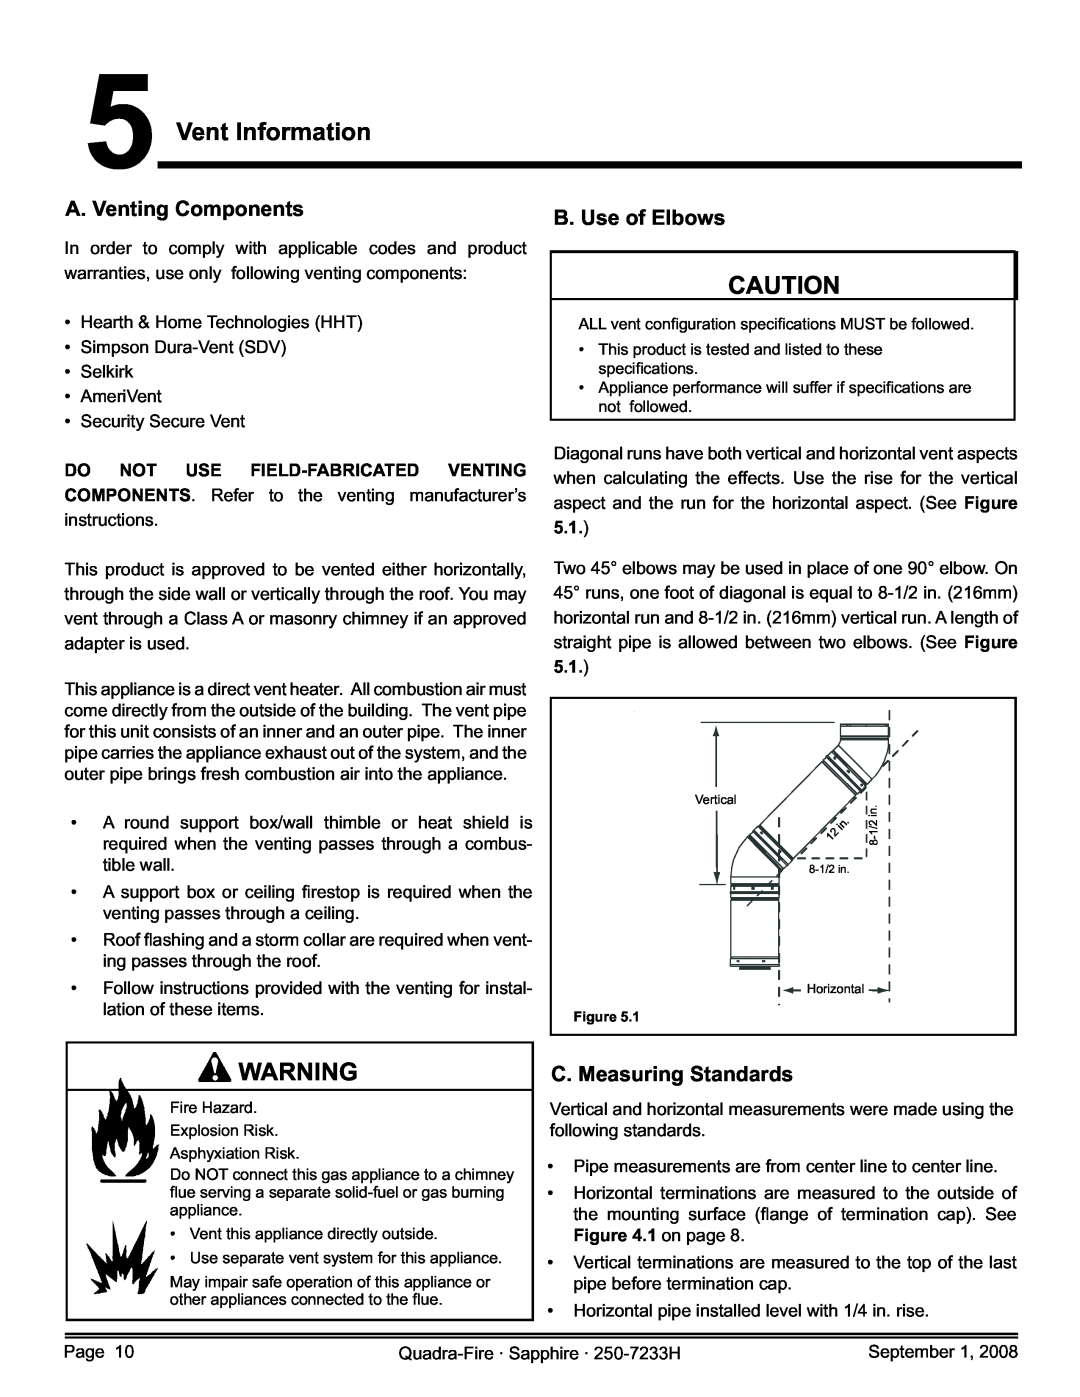 Hearth and Home Technologies 839-1390 Vent Information, A. Venting Components, B. Use of Elbows, C. Measuring Standards 